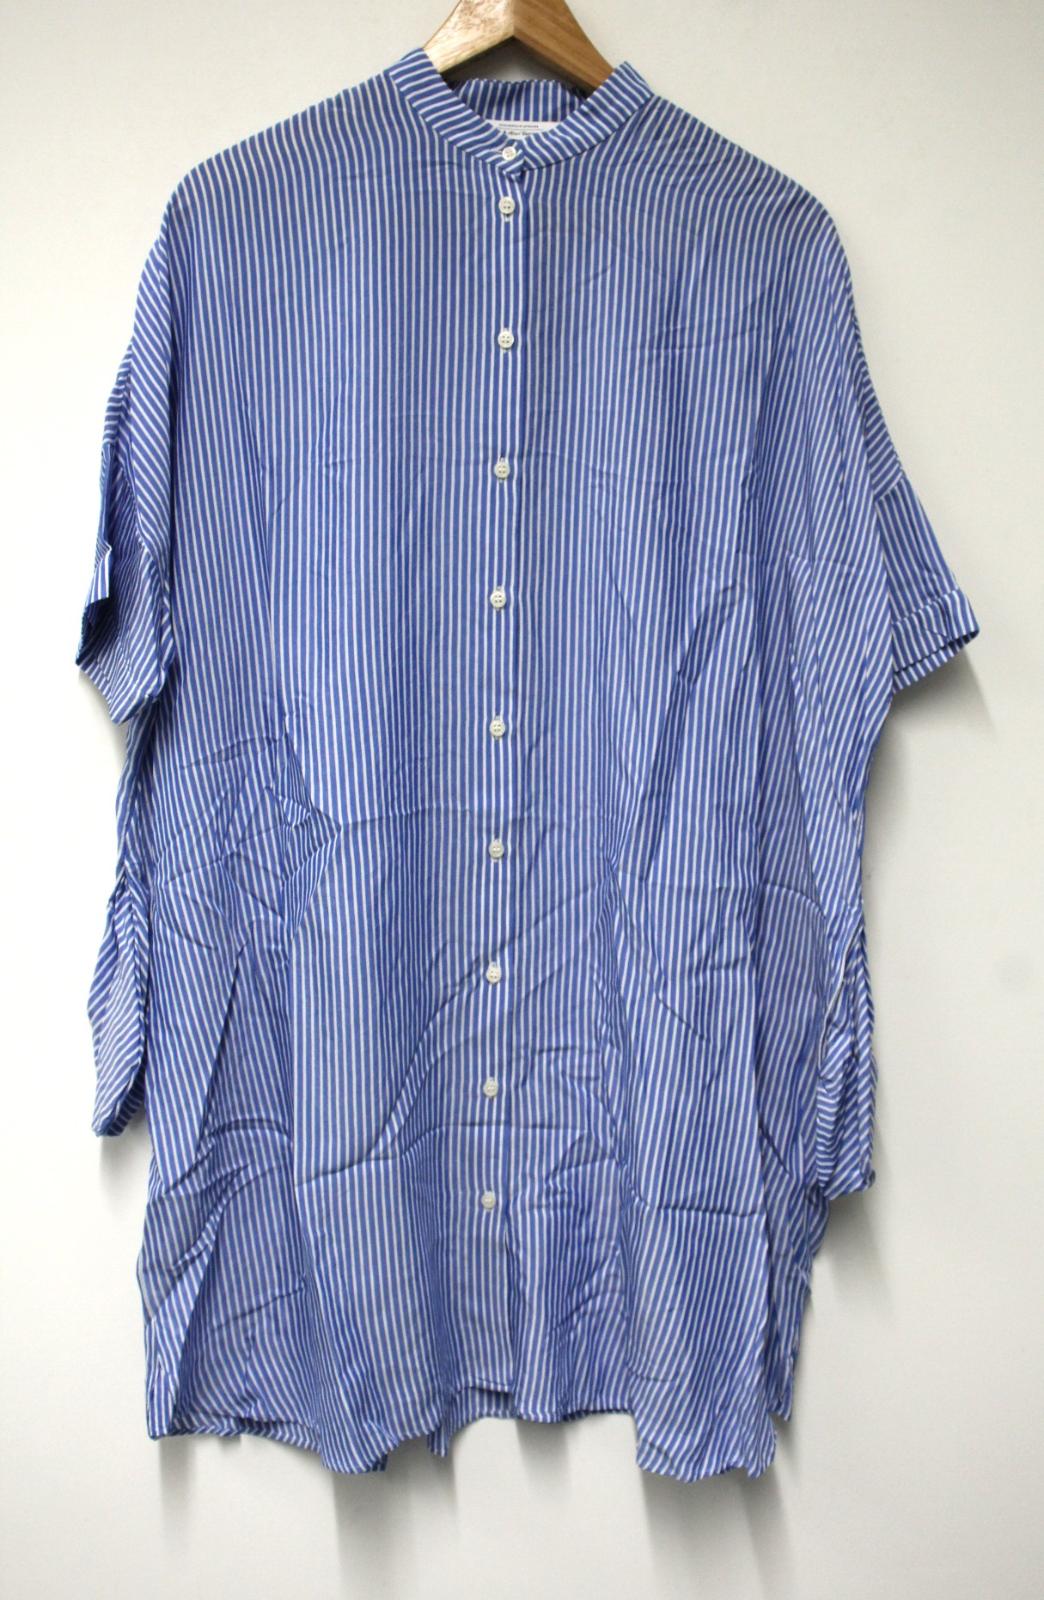 & OTHER STORIES Ladies Blue & White Striped Oversized Tunic Top US8 UK12